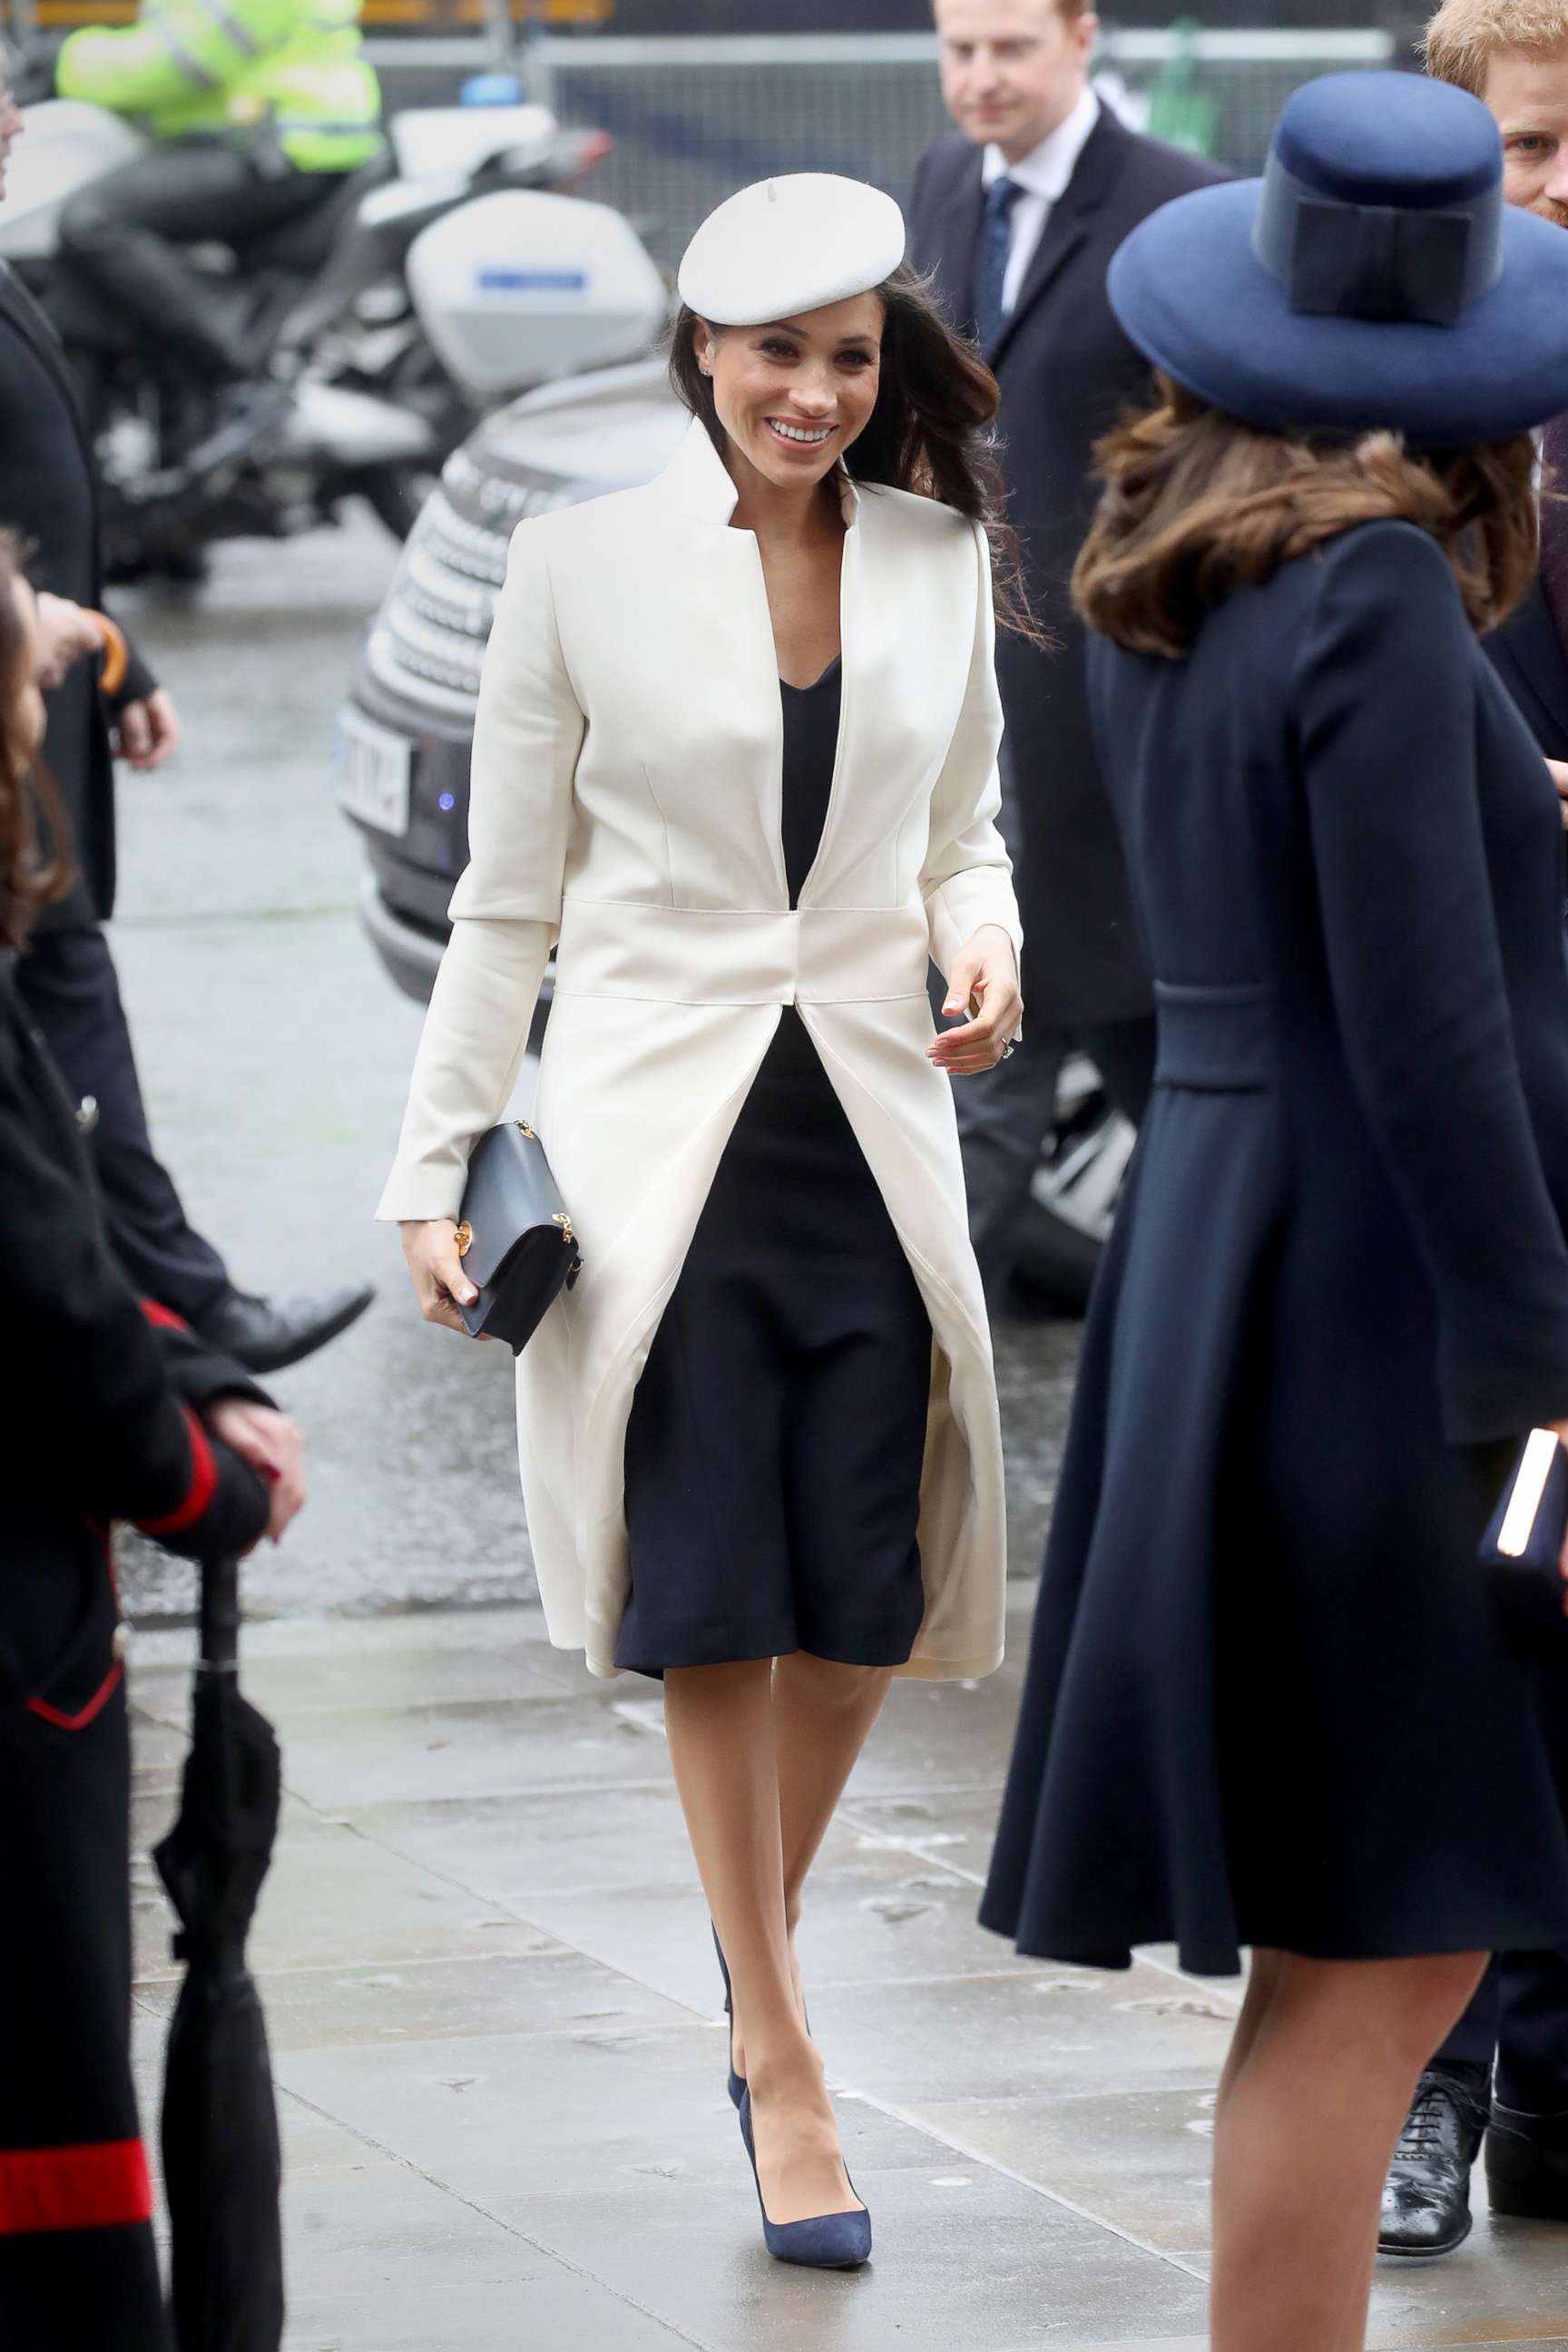 PHOTO: Meghan Markle attends the 2018 Commonwealth Day service at Westminster Abbey. March 12, 2018 in London.